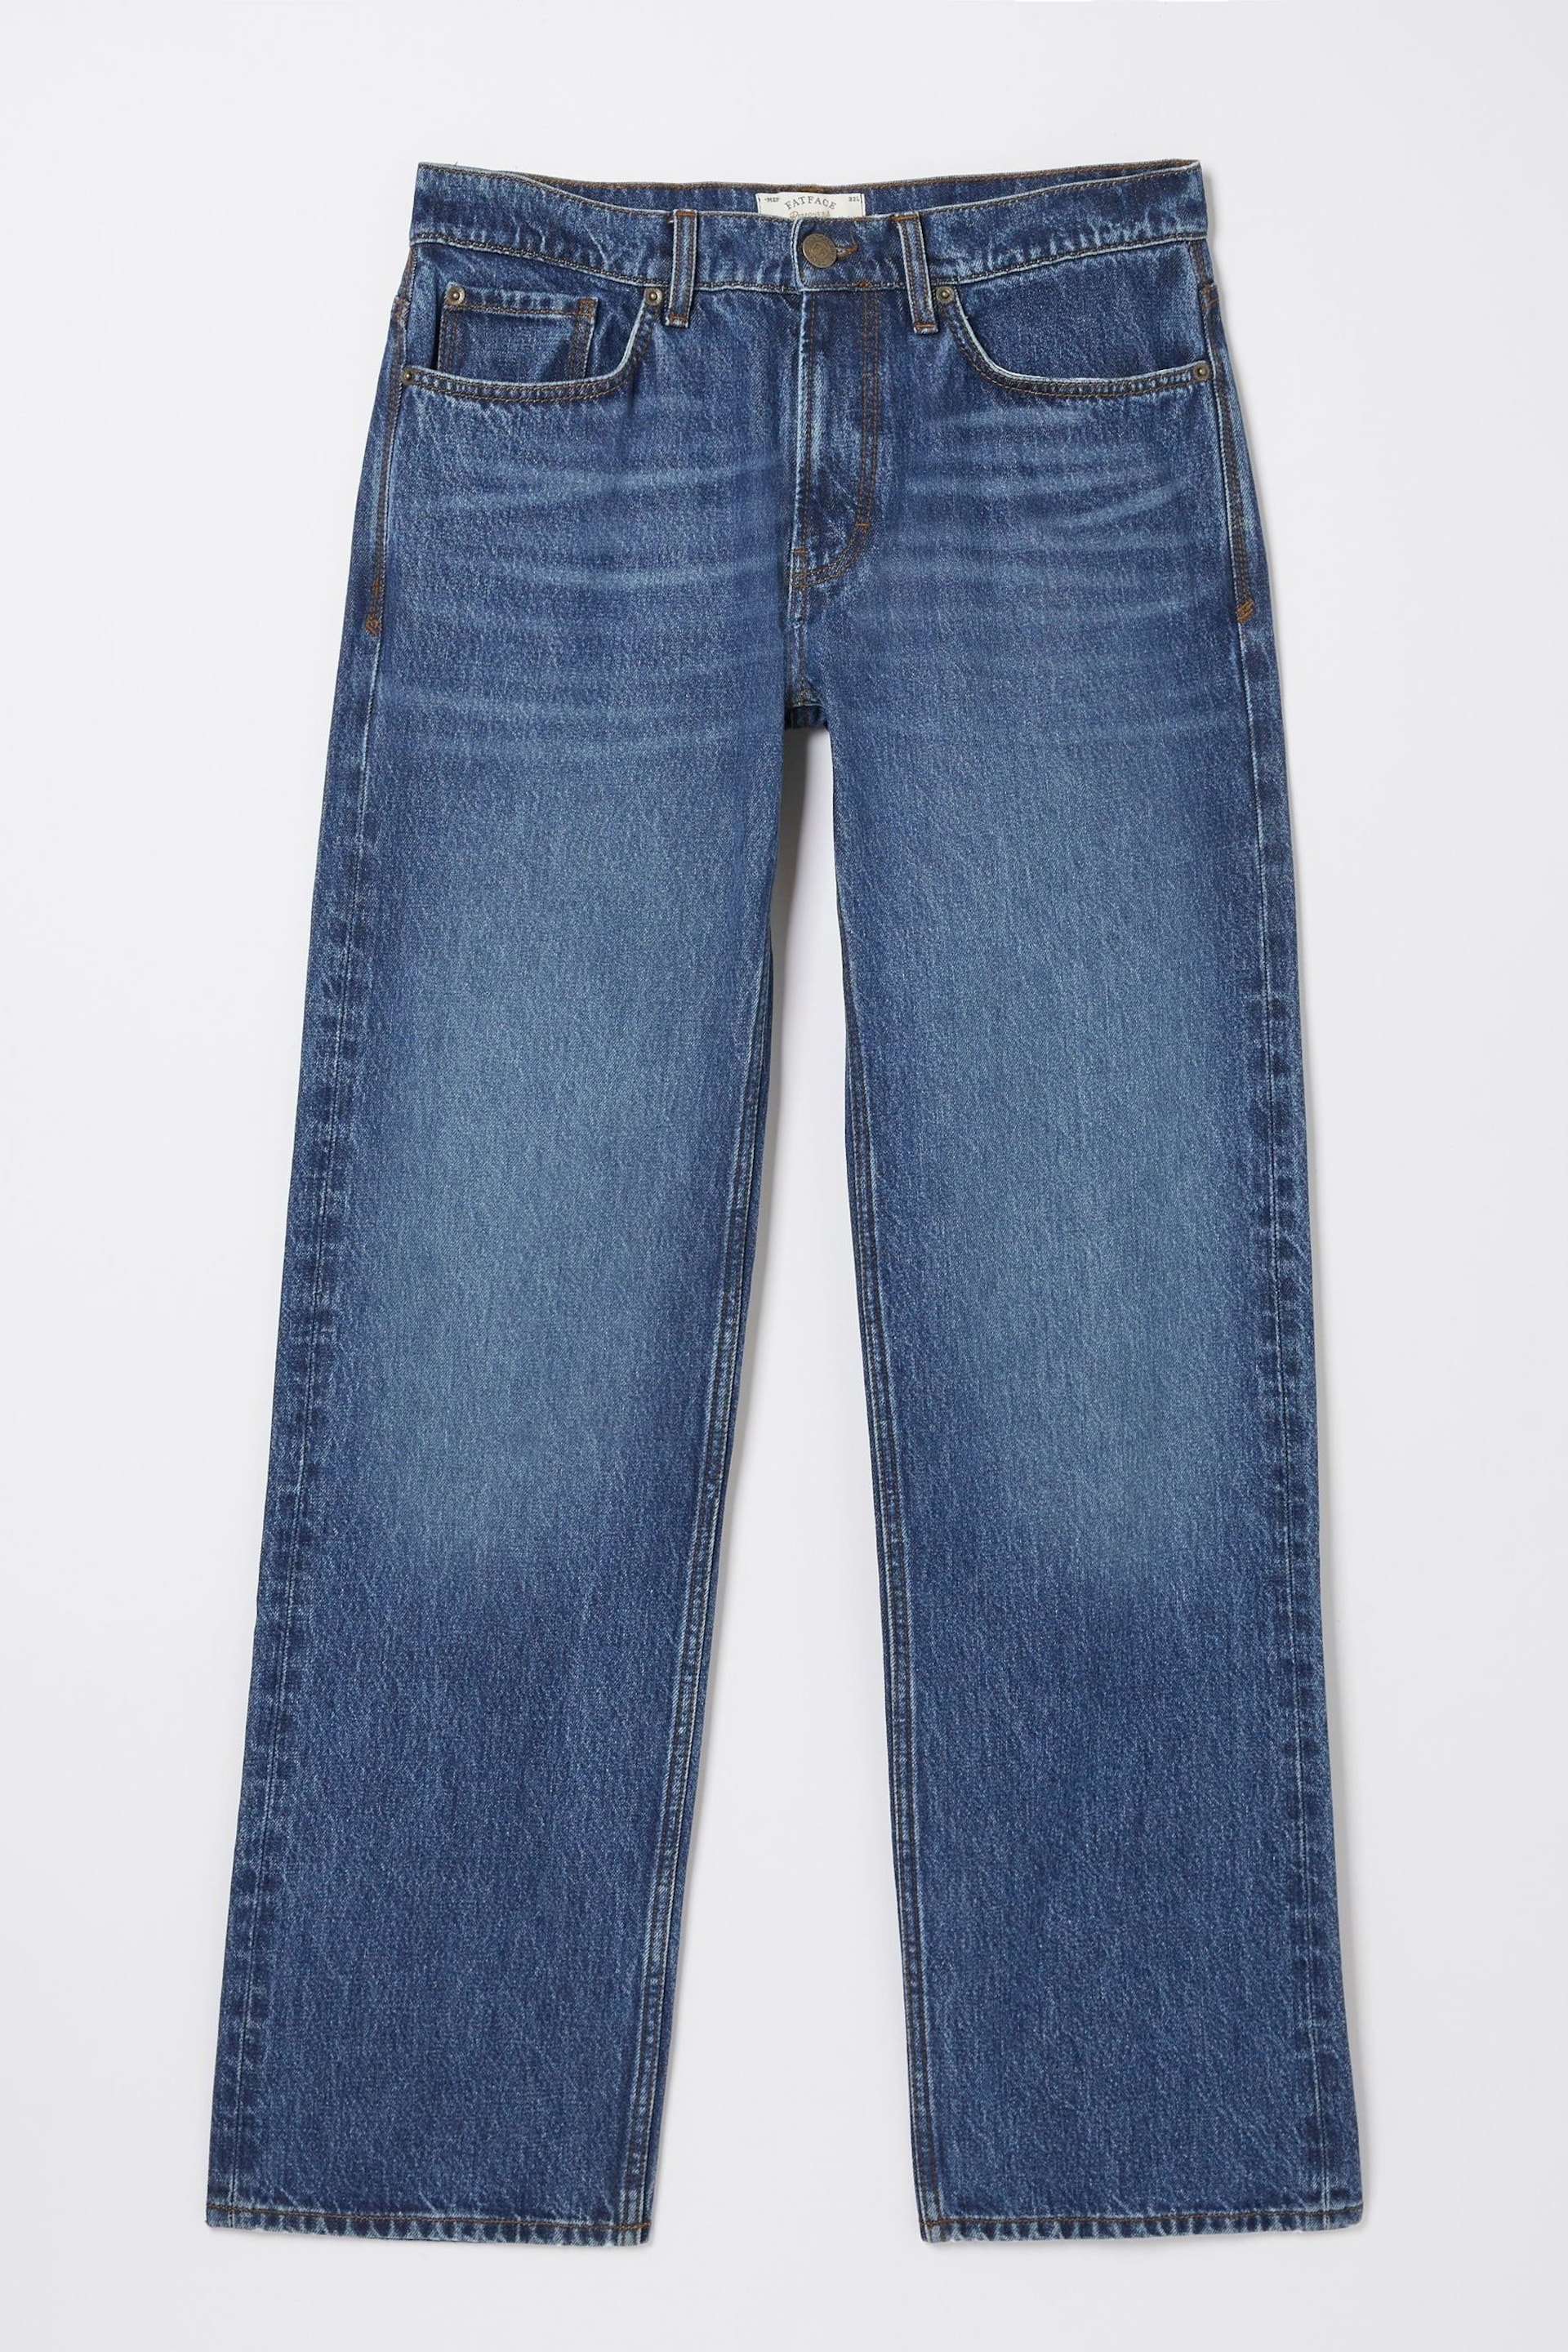 FatFace Blue Loose Fit Jeans - Image 5 of 5